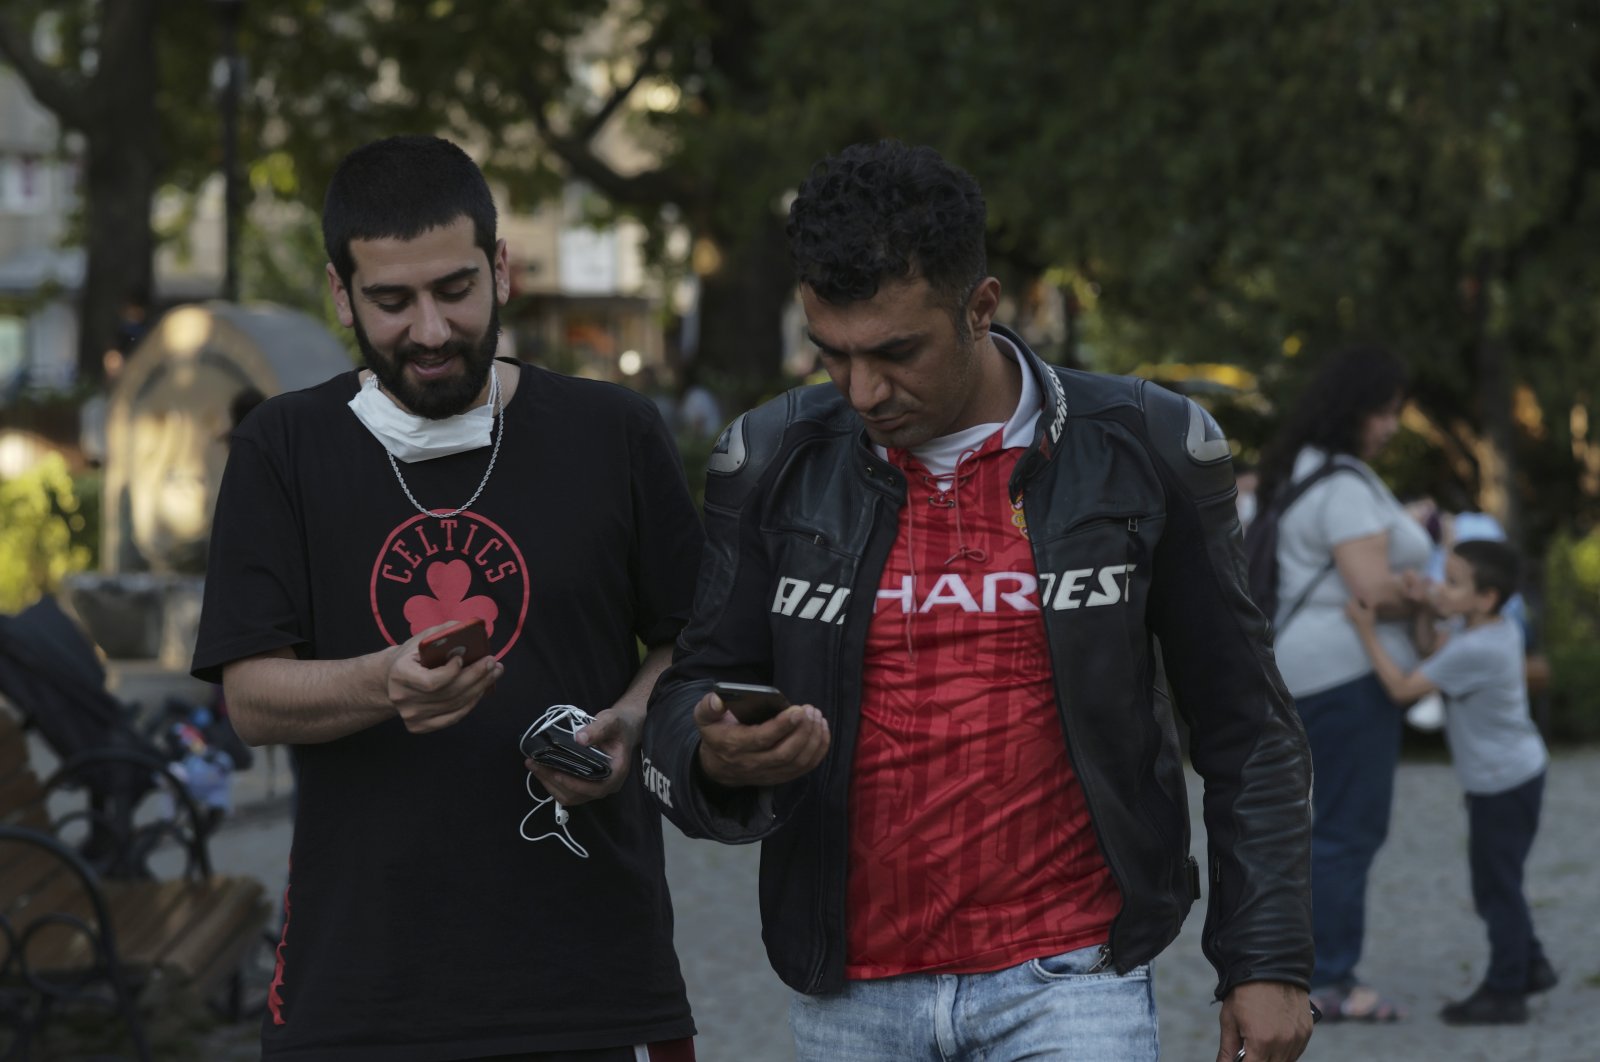 Two men without face coverings speak as they check their mobile phones in a public garden, in Ankara, Turkey, Tuesday, June 30, 2020. (AP Photo)